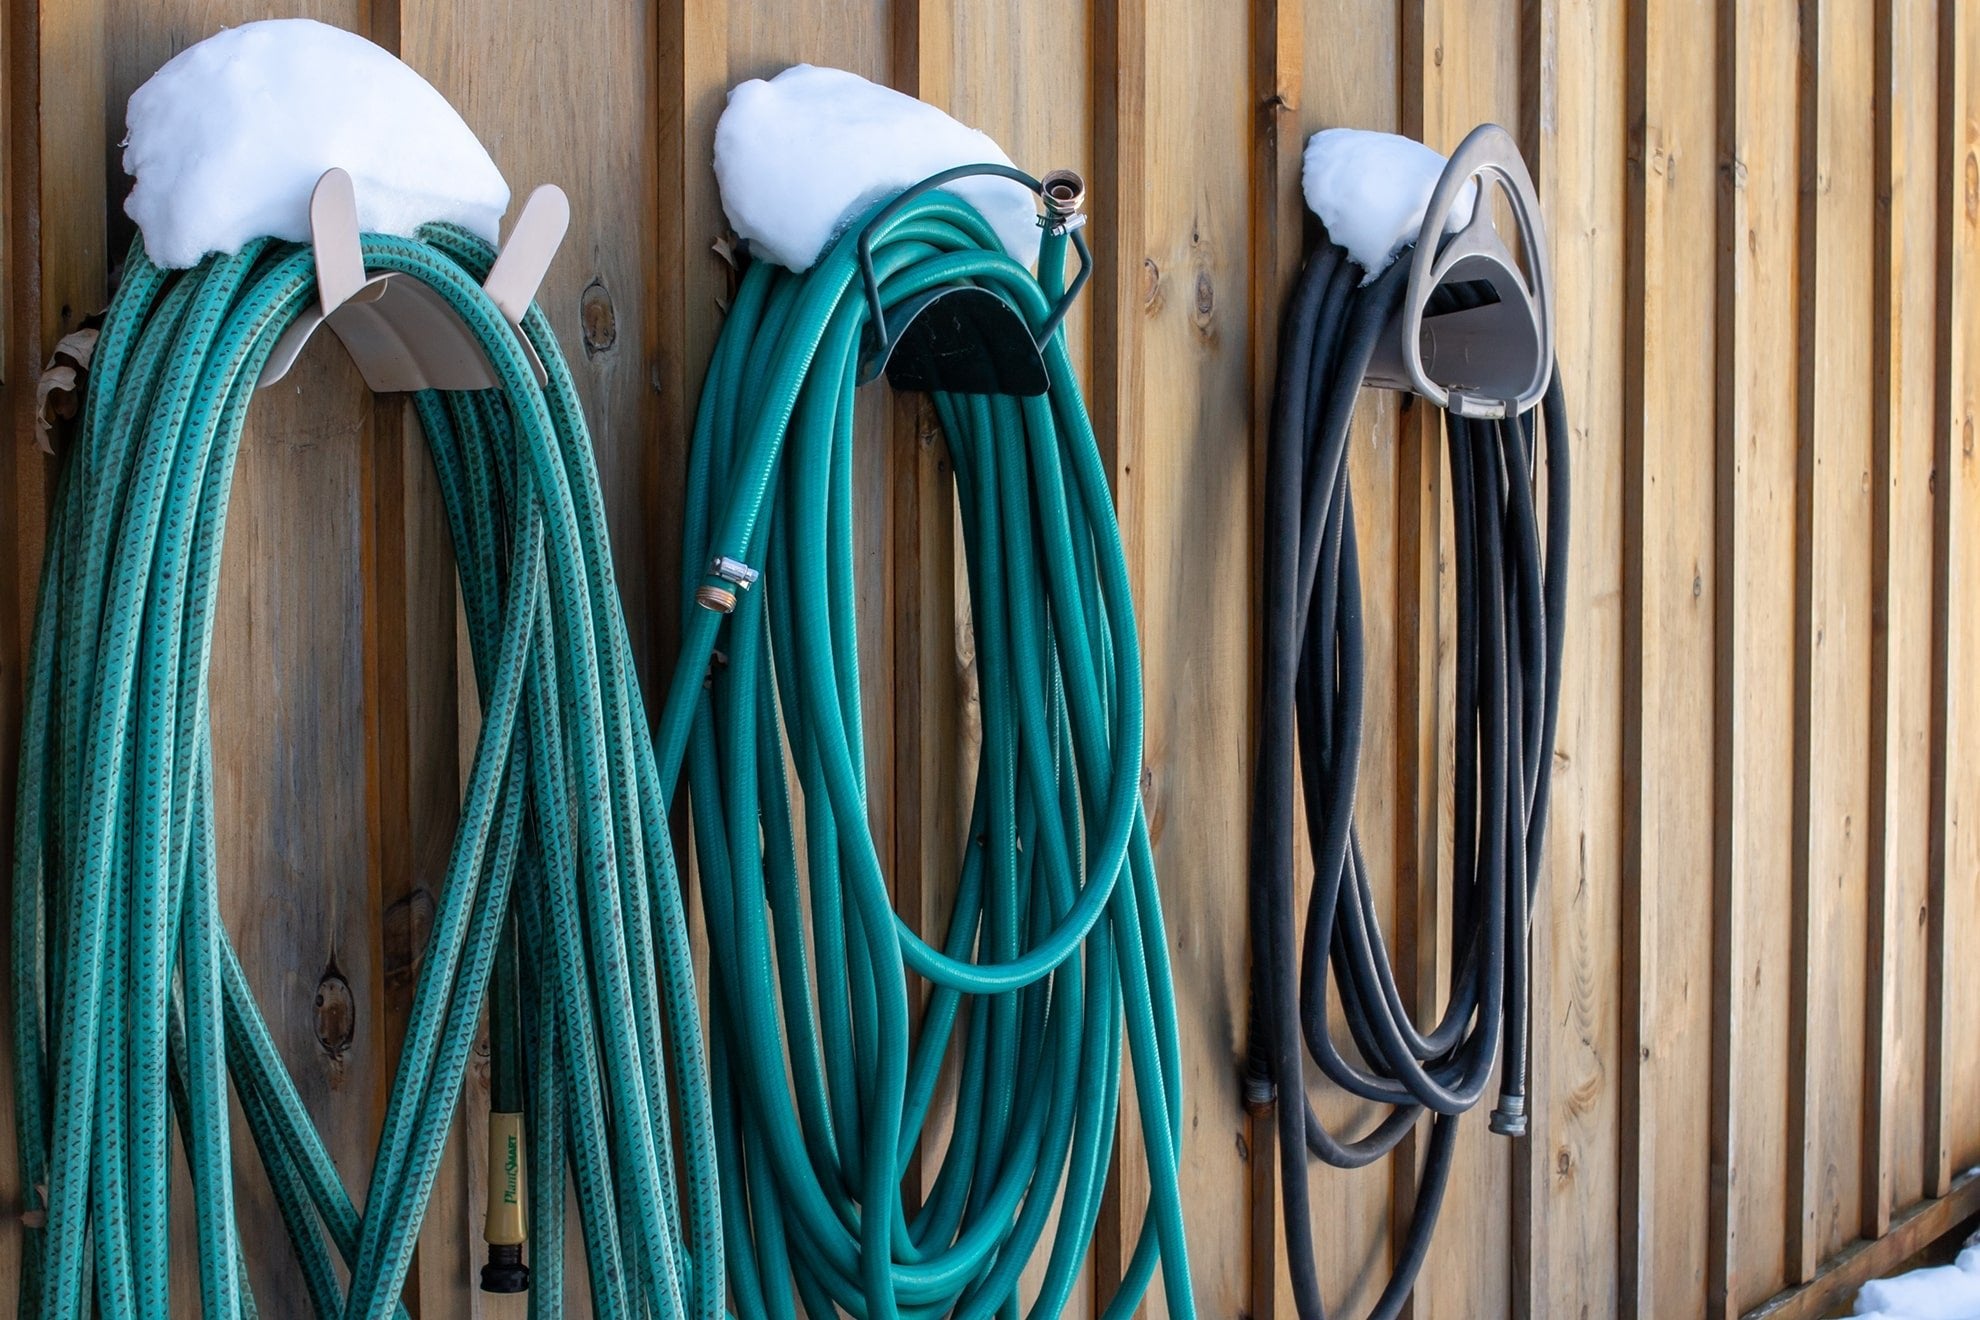 Five Easy Ways To Keep Your Garden Hose From Freezing - Giraffe Tools